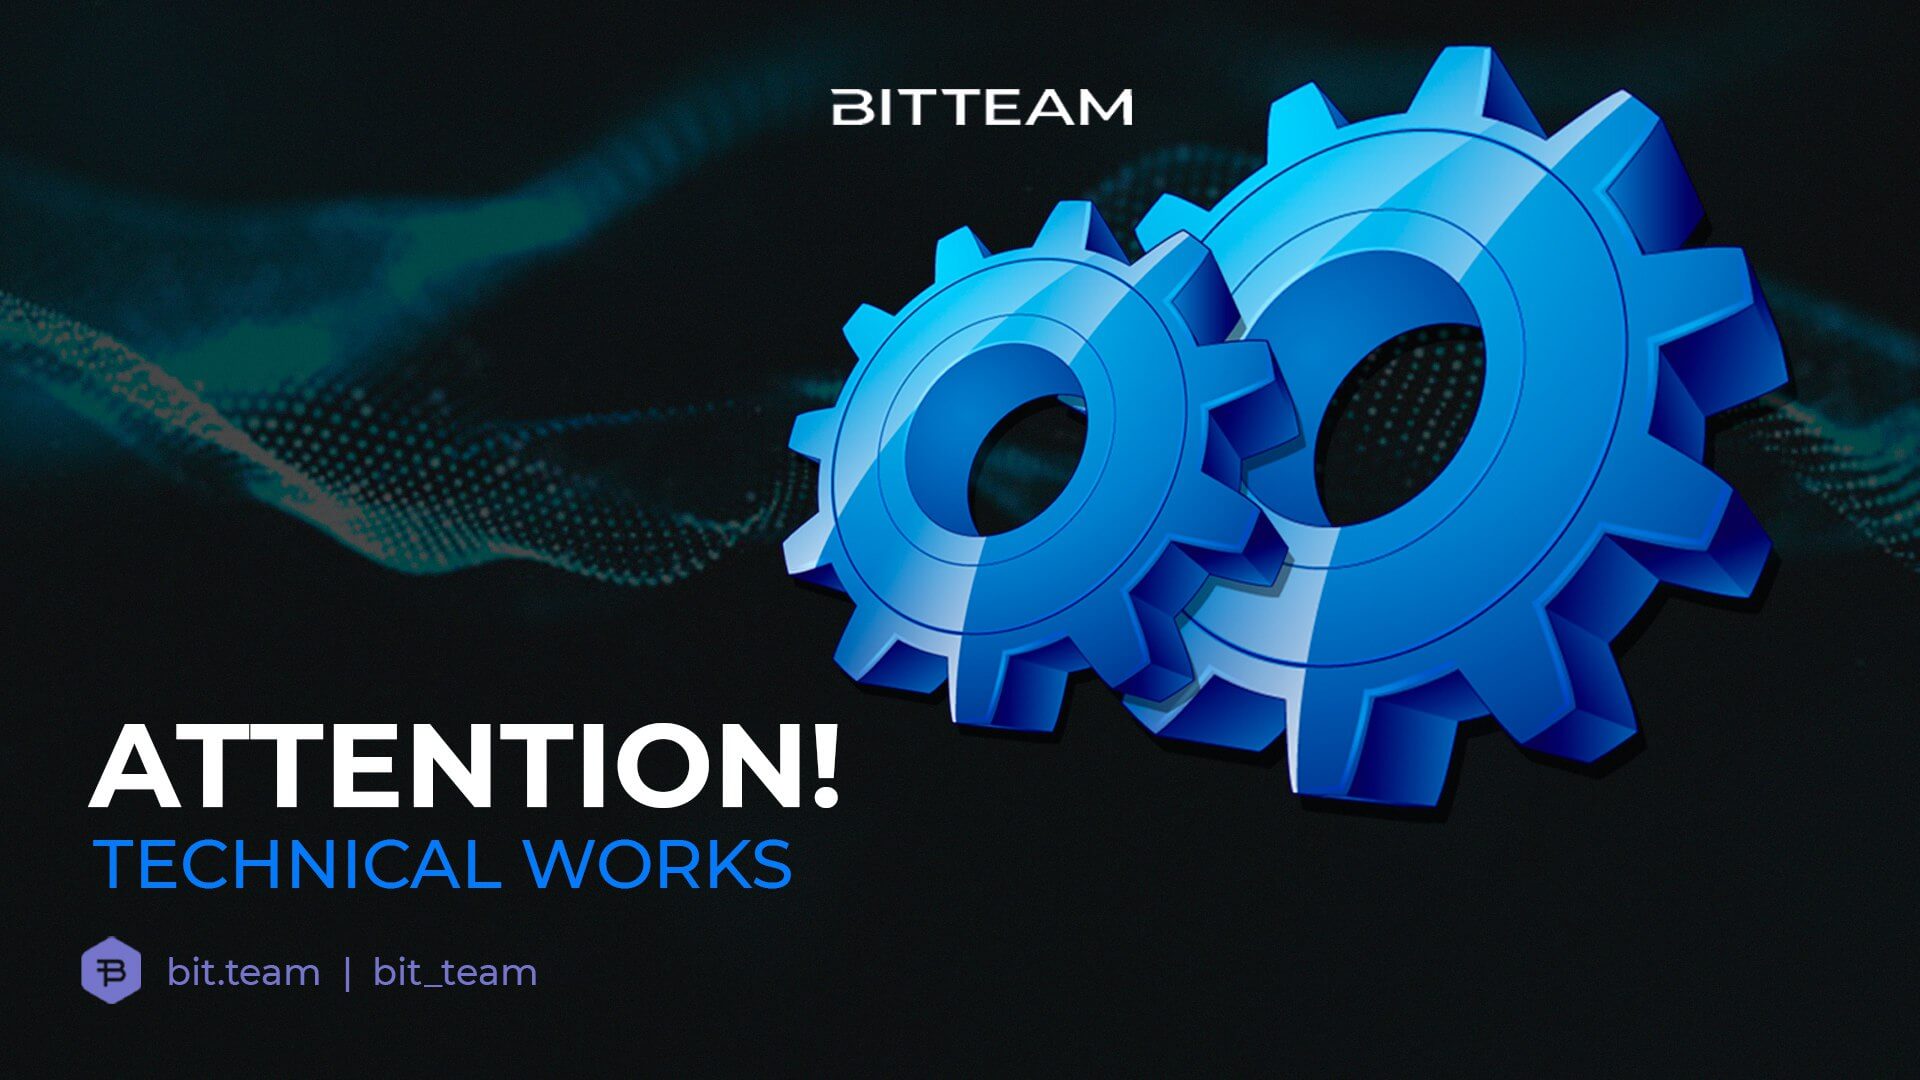 Today, starting from 00:00 (UTC+3), the Bit.Team exchange will be under maintenance due to updating